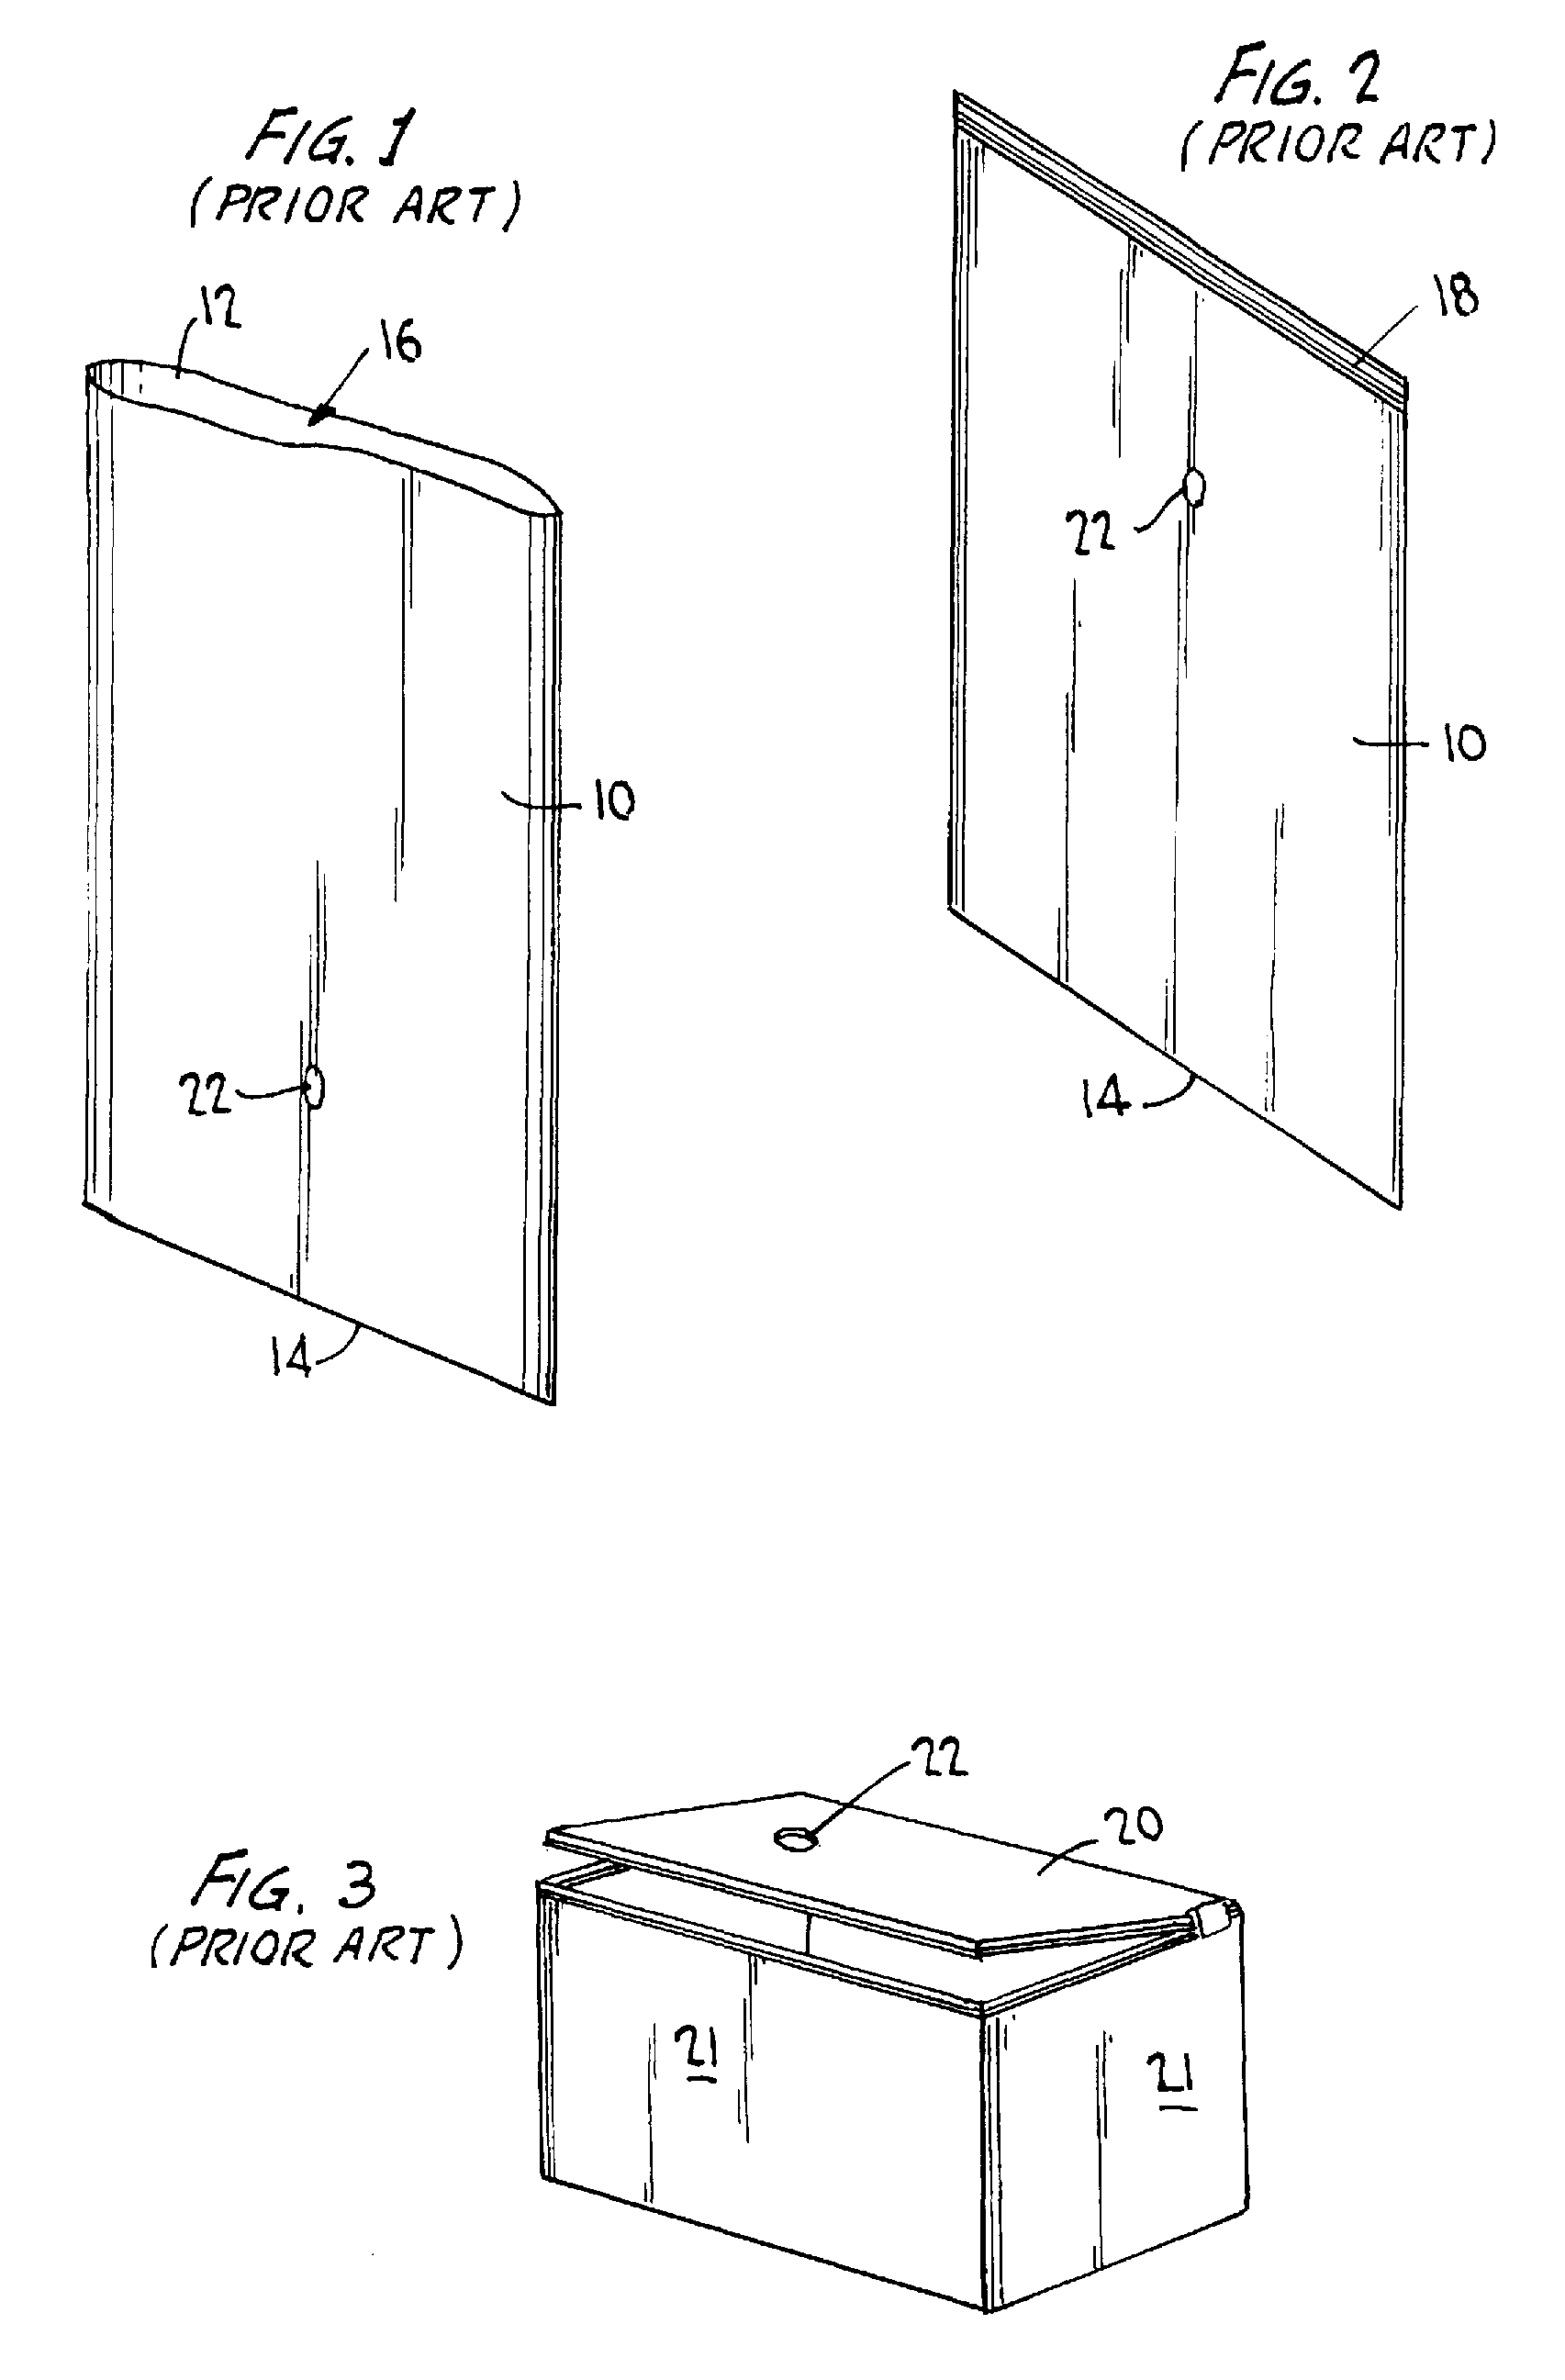 Vacuum valve and compression storage bags including the valve